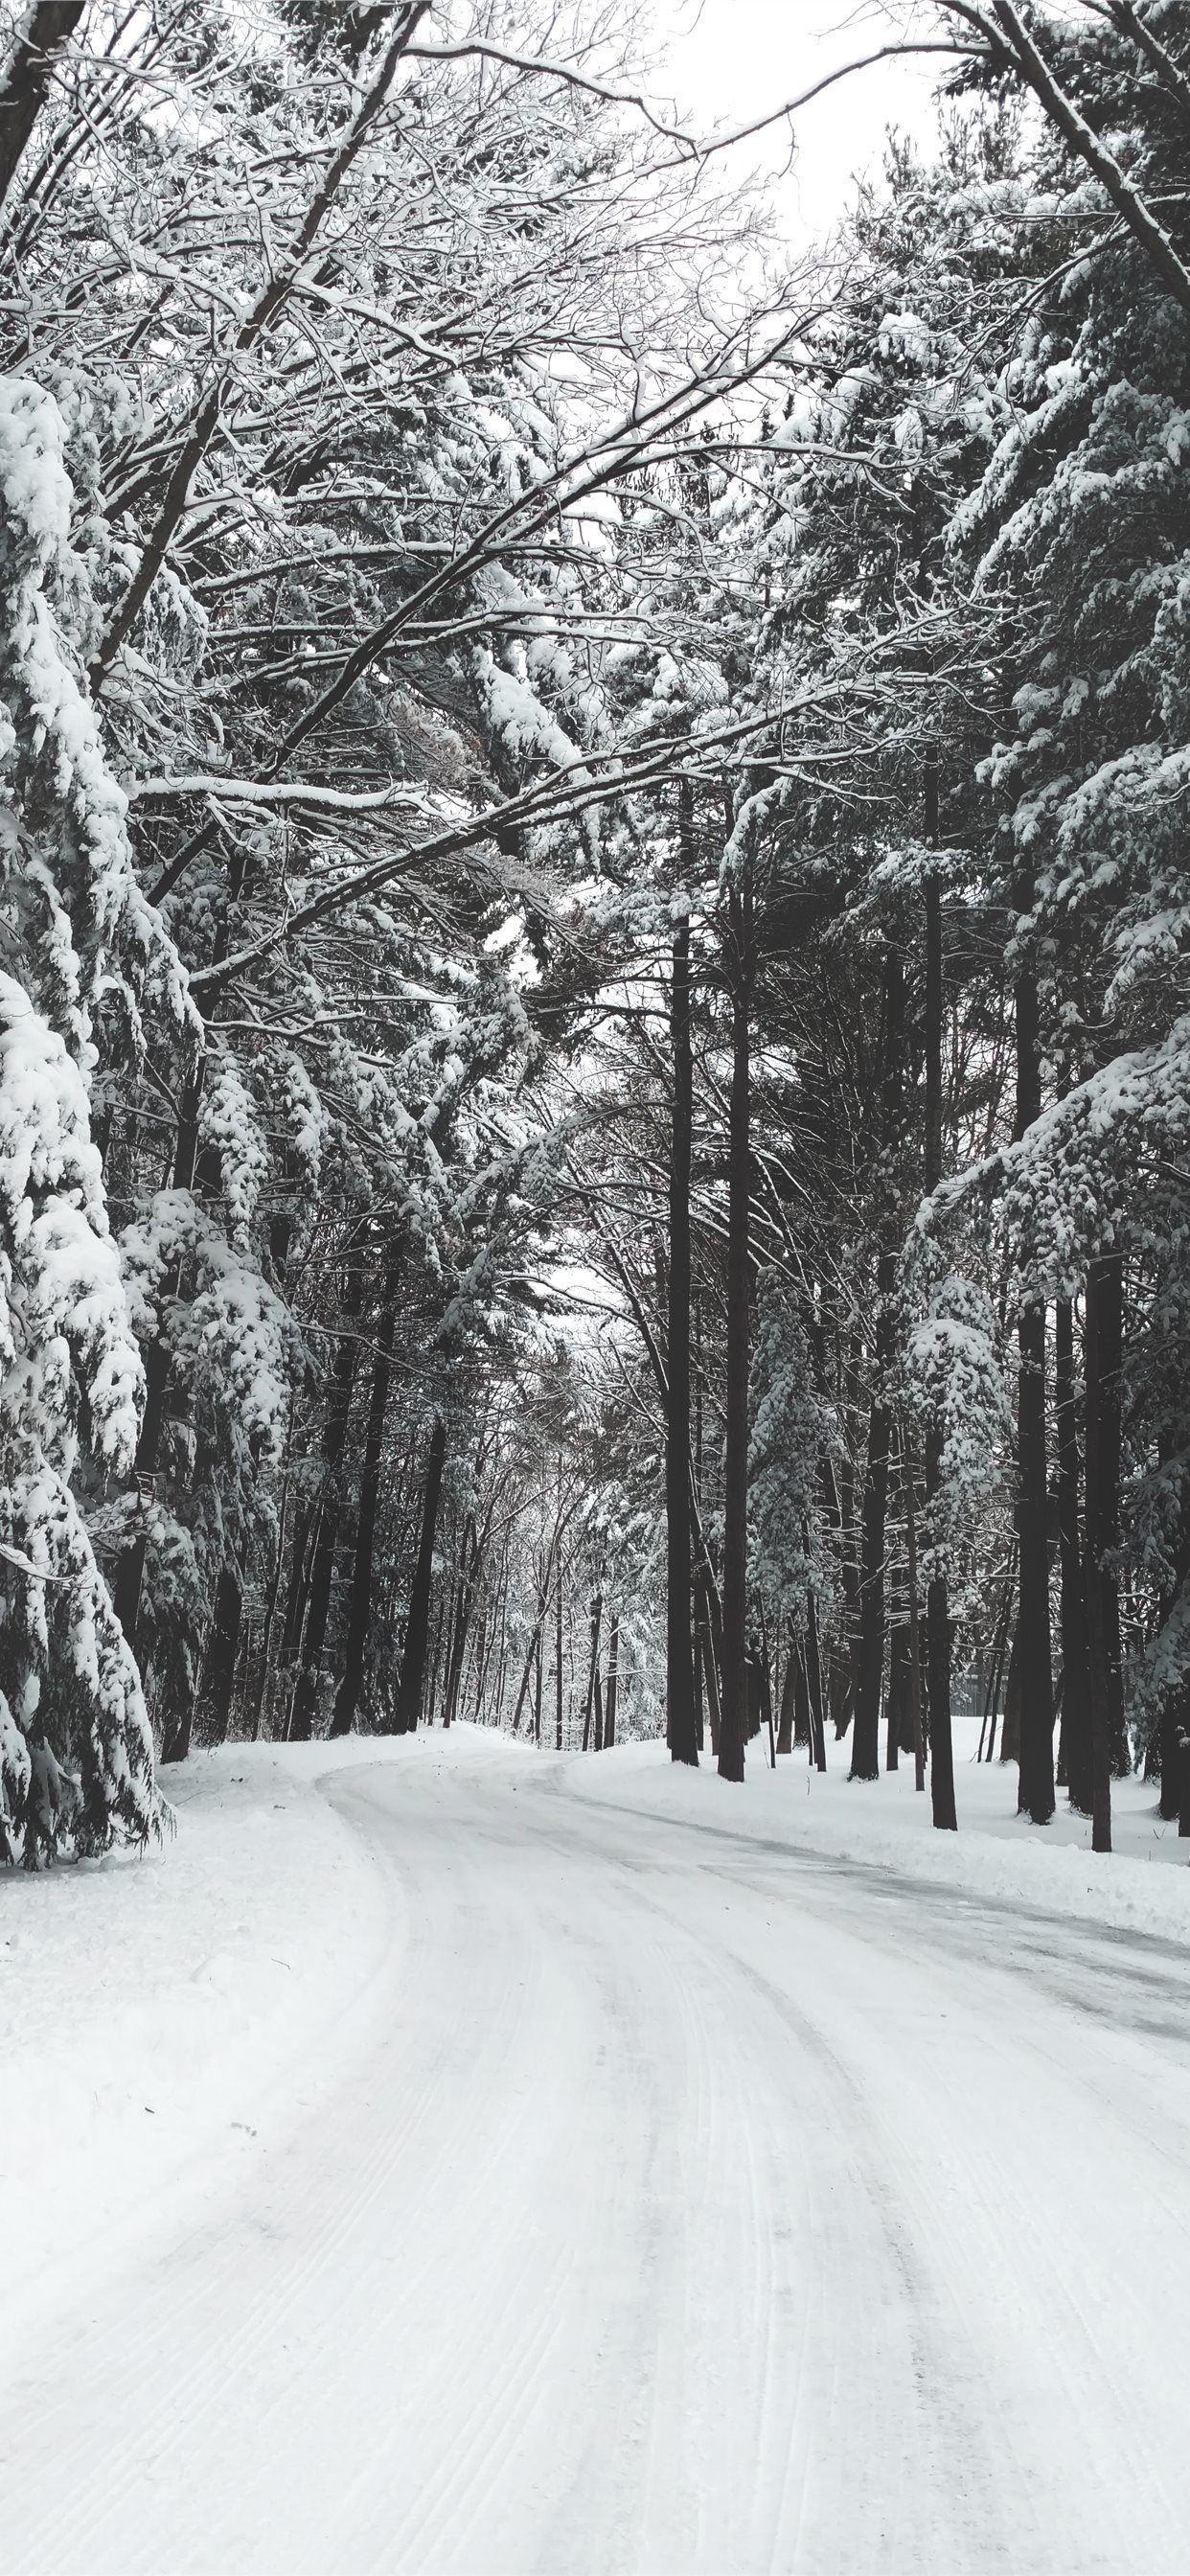 road surrounded by trees during winter iPhone X Wallpaper Free Download